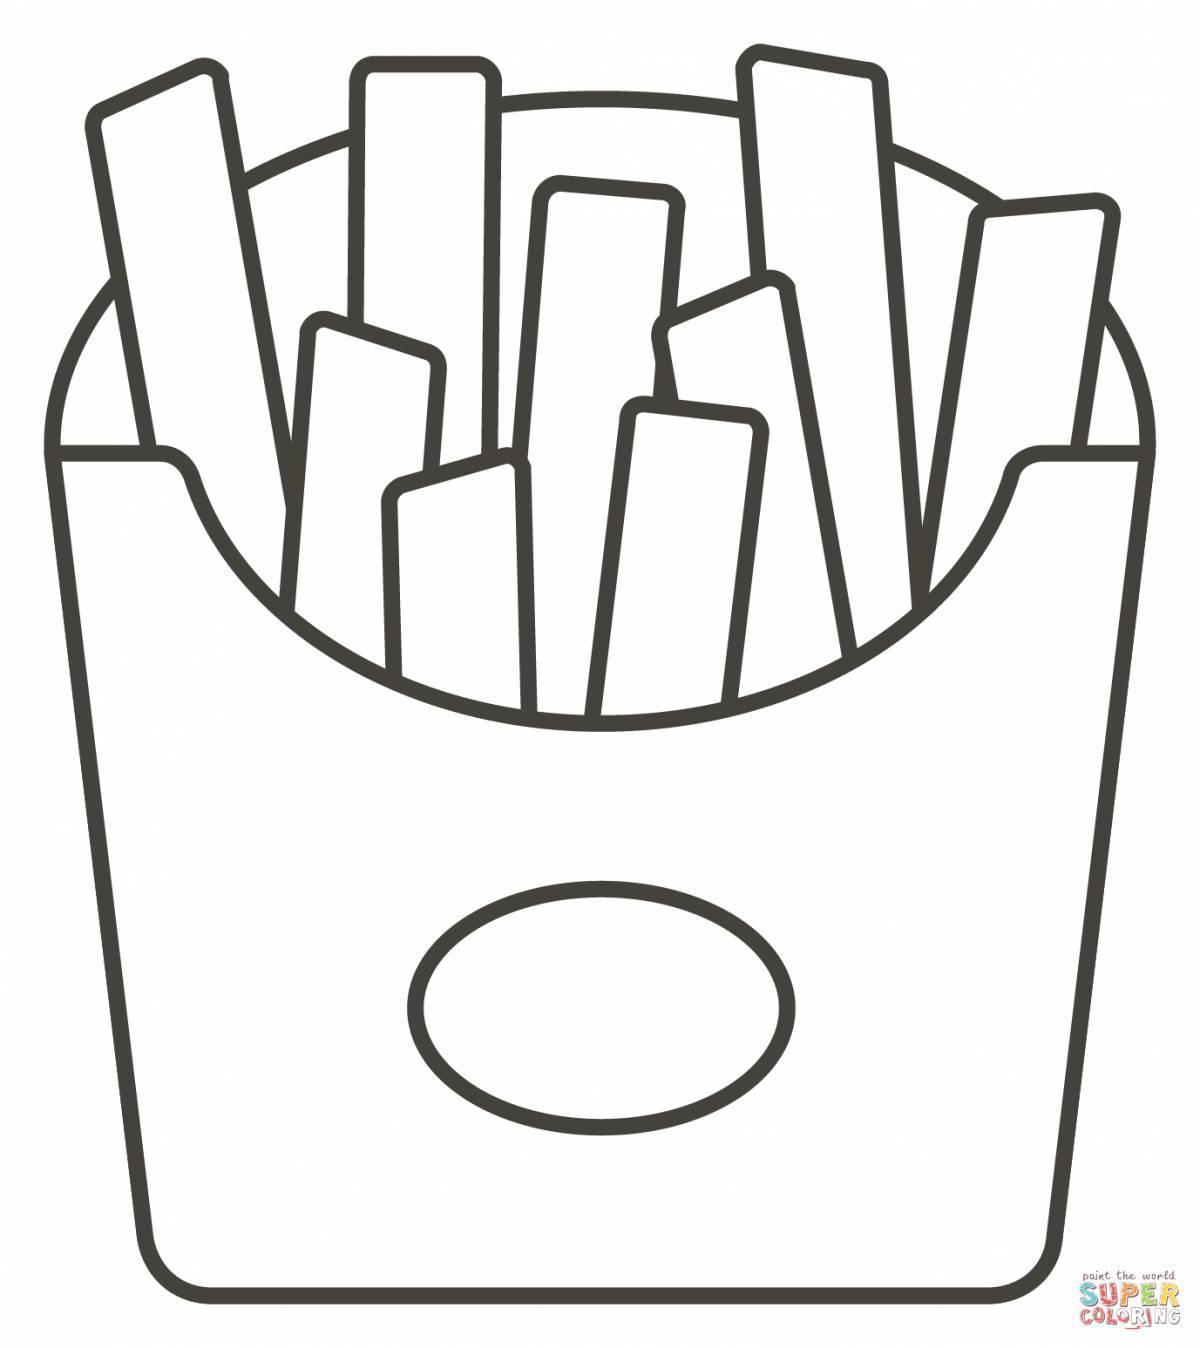 Coloring book with herbs french fries